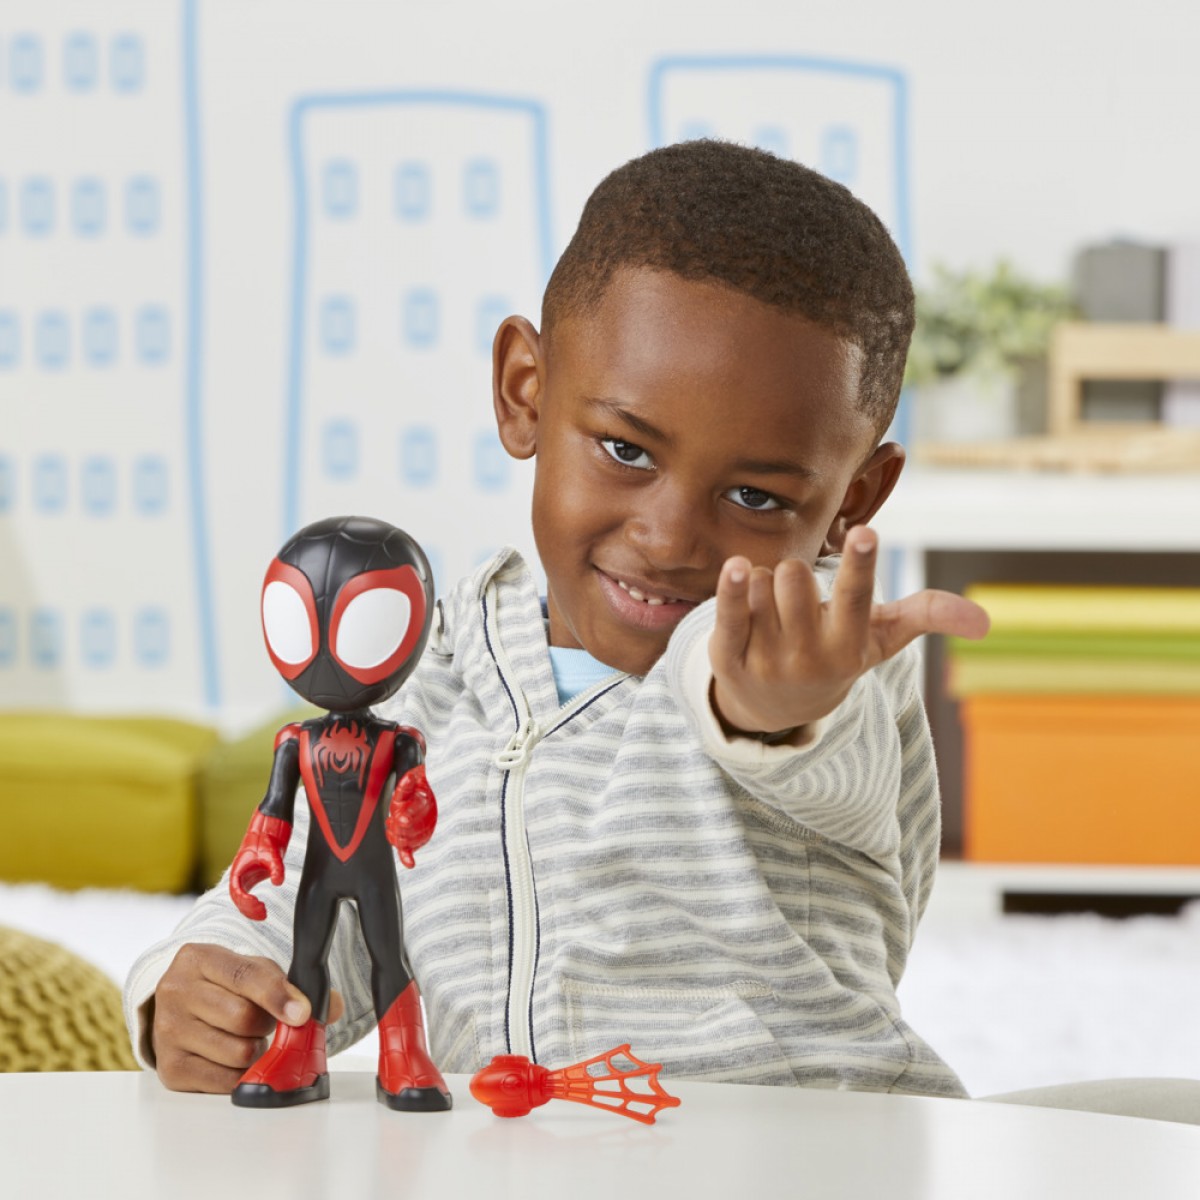 Marvel: Spidey and His Amazing Friends Miles Morales Spider-Man